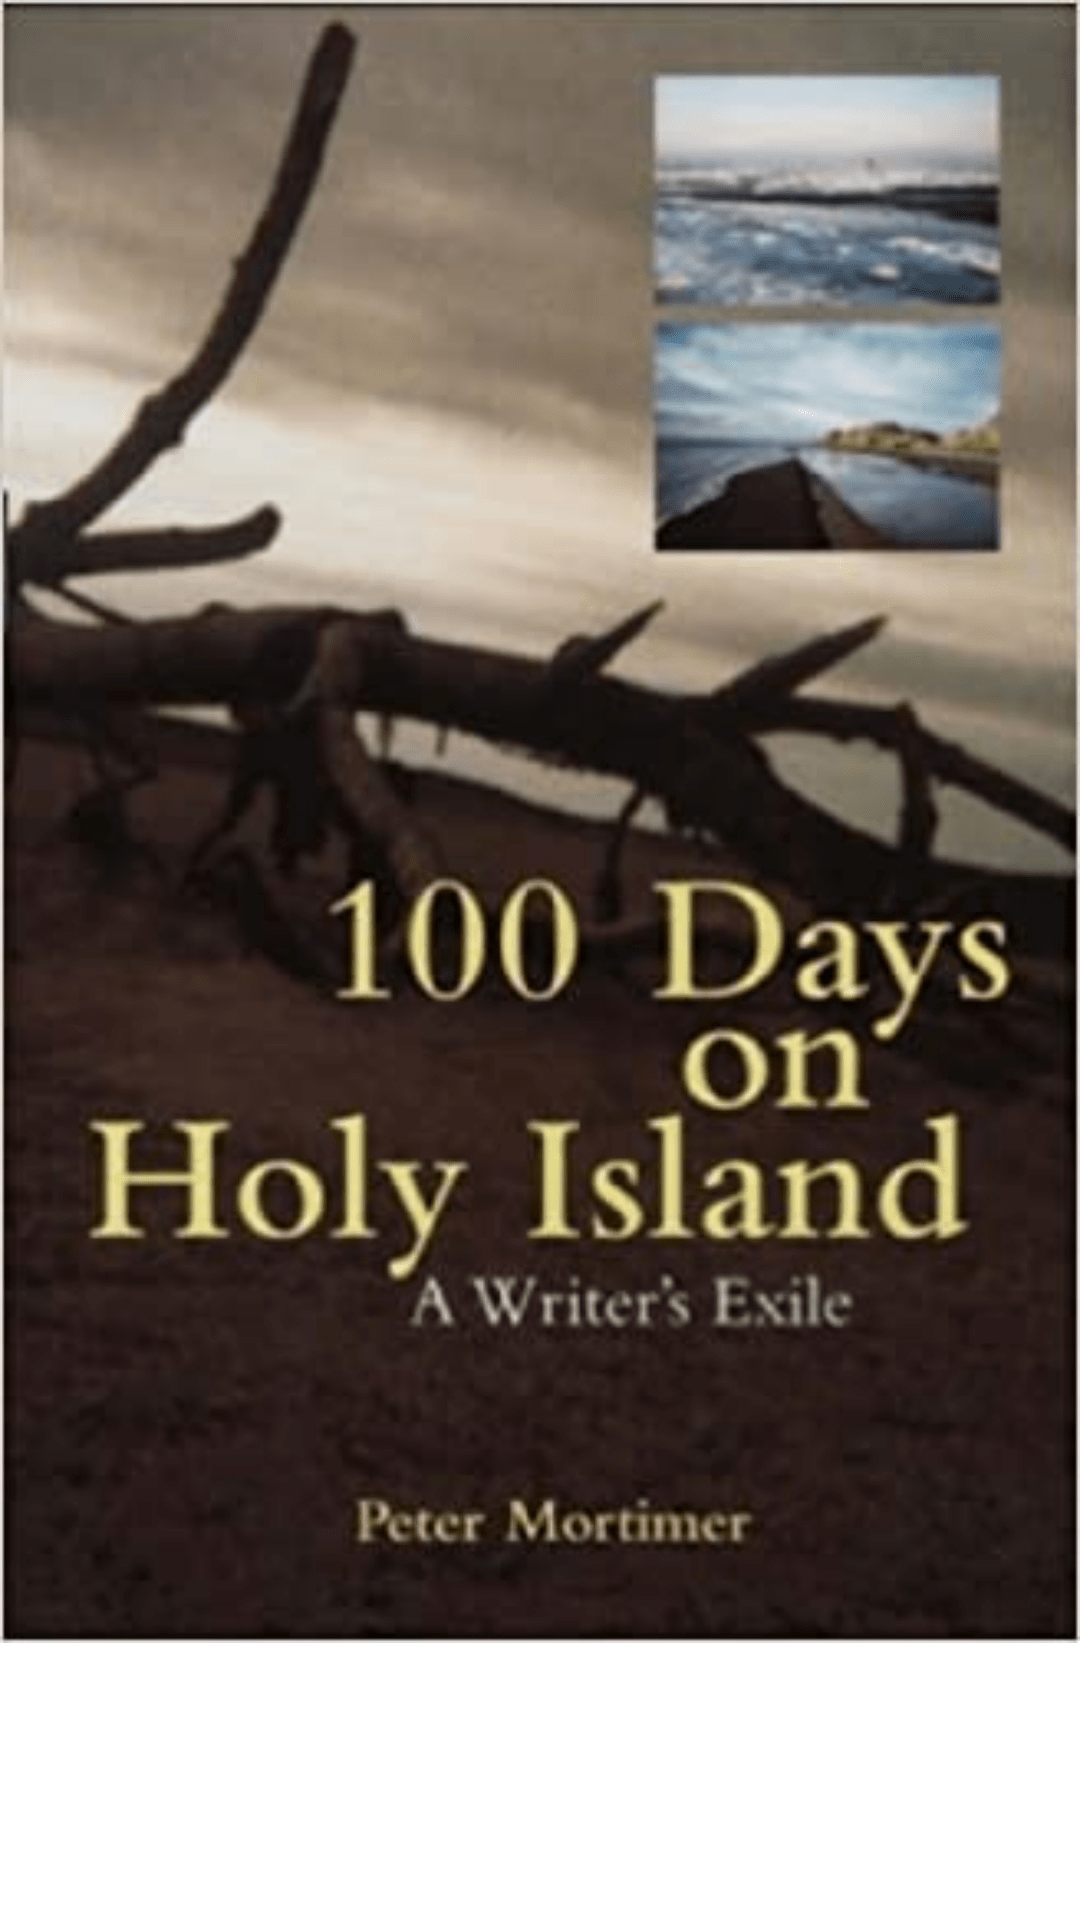 100 Days on Holy Island: A Writer's Exile